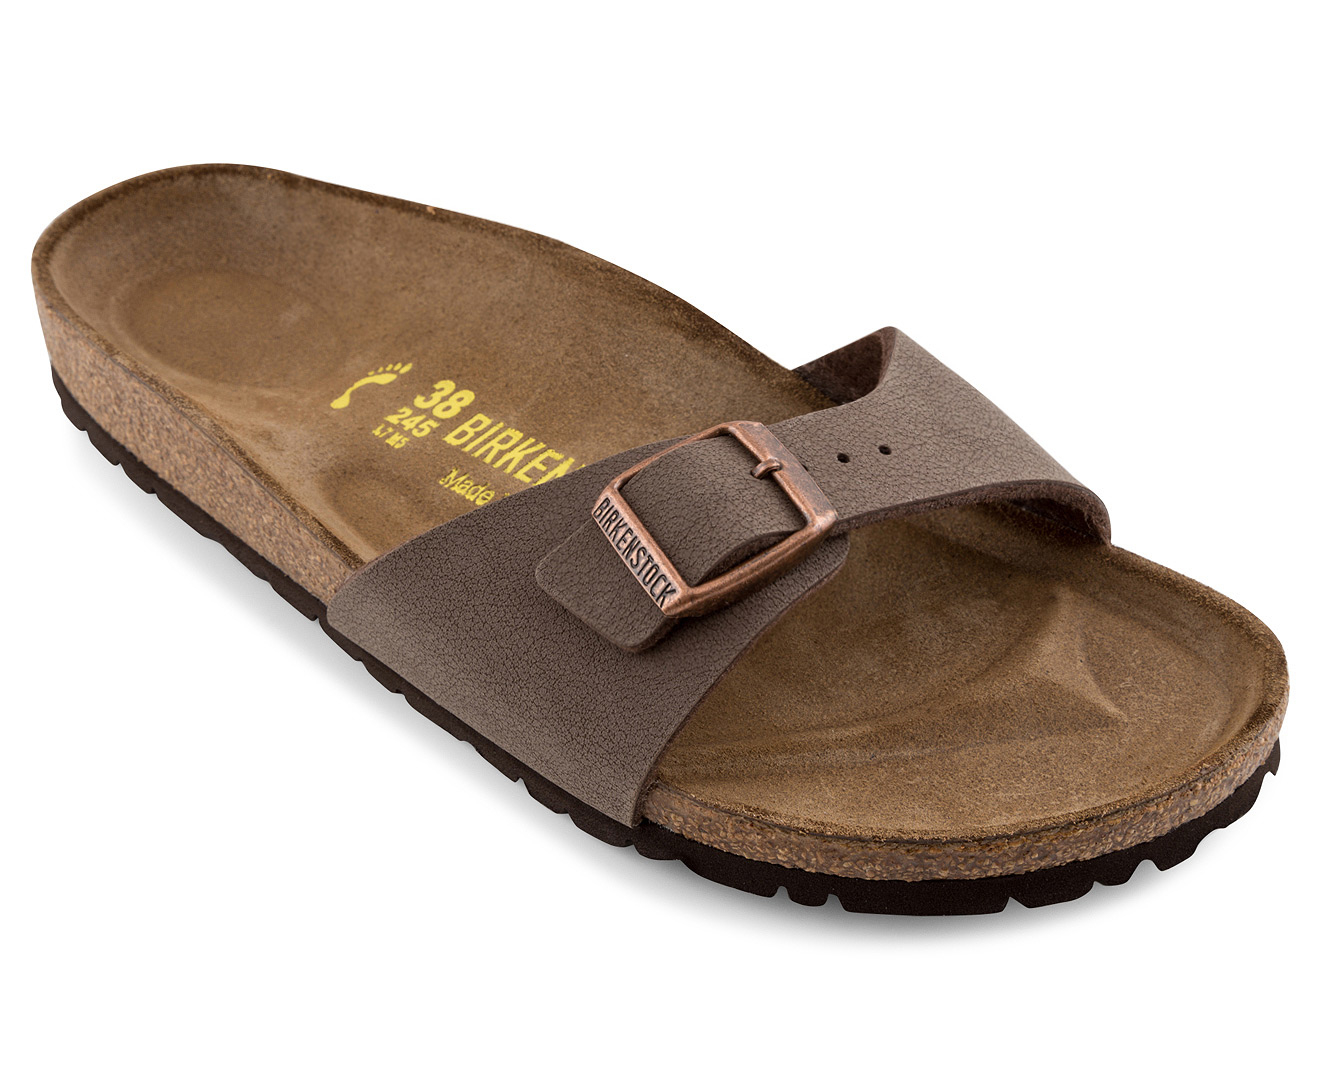 Madrid Narrow Fit Sandals - Mocca 